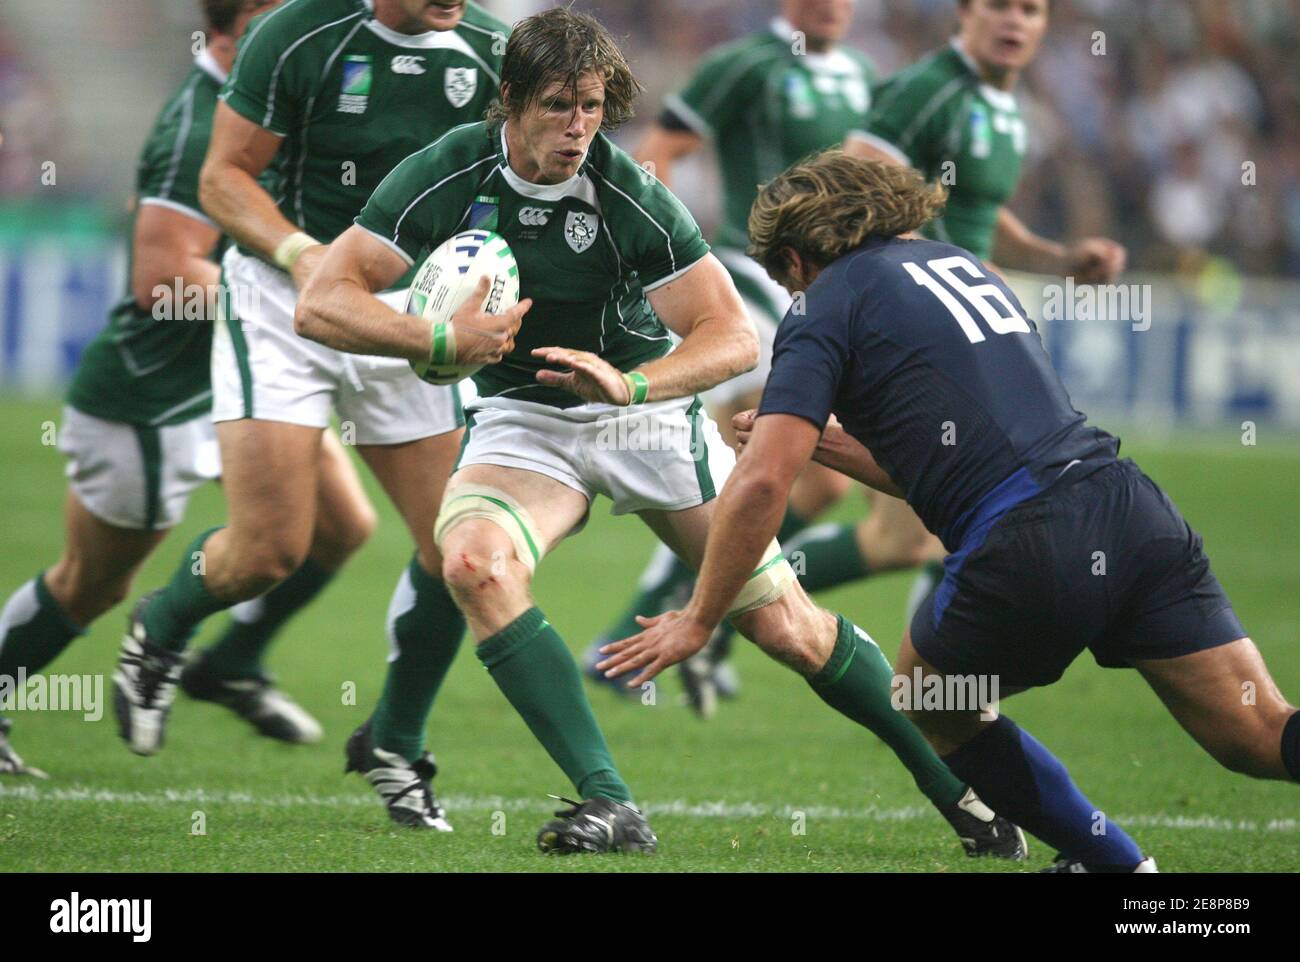 Irelands Simon Easterby during the IRB Rugby World Cup 2007, Pool D, France vs Ireland at